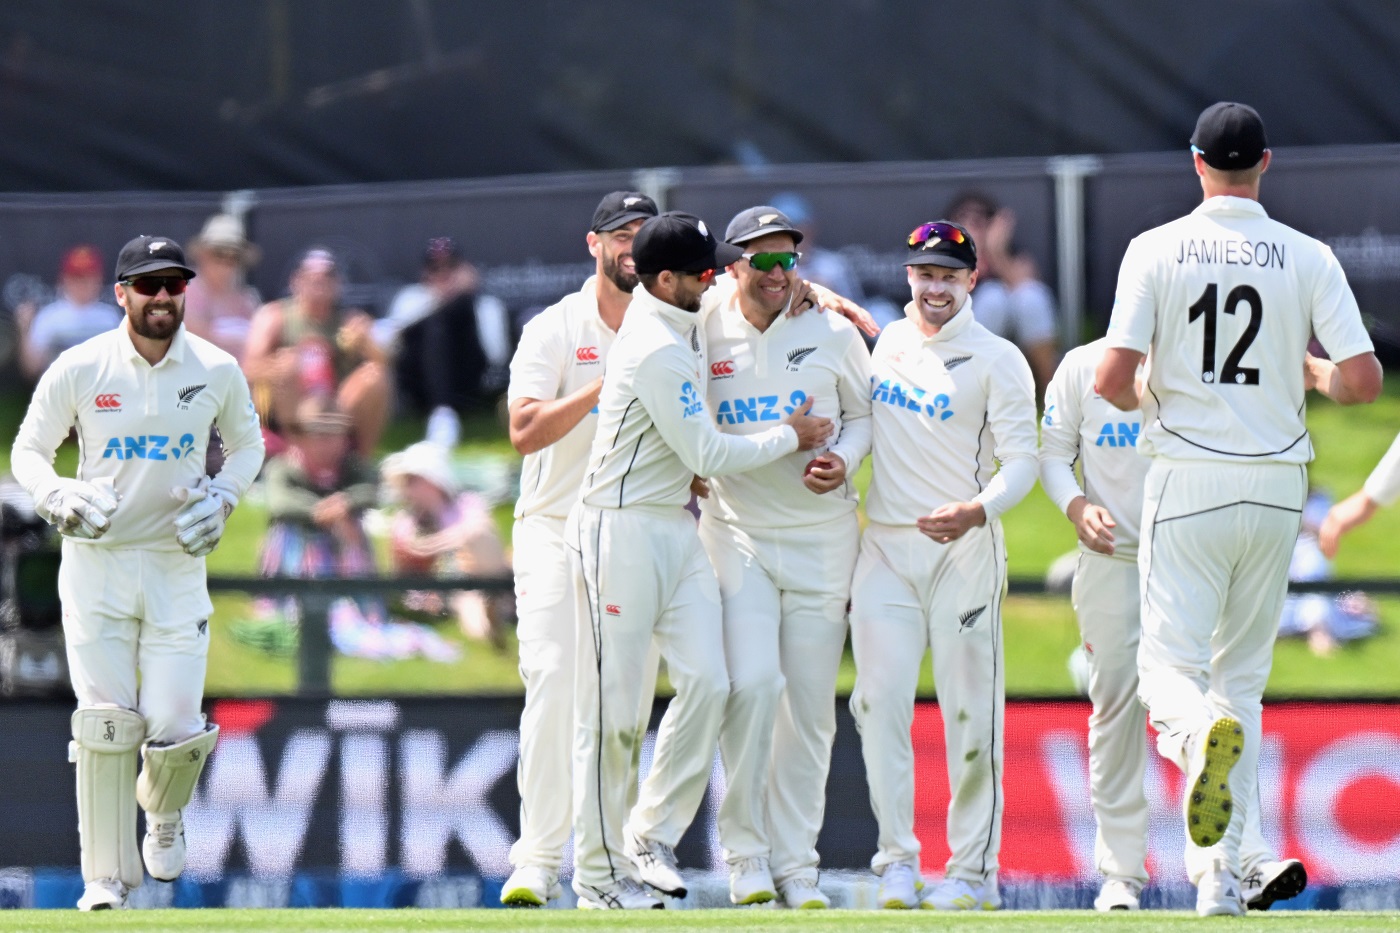 New Zealand crashes Bangladesh in the 2nd Test